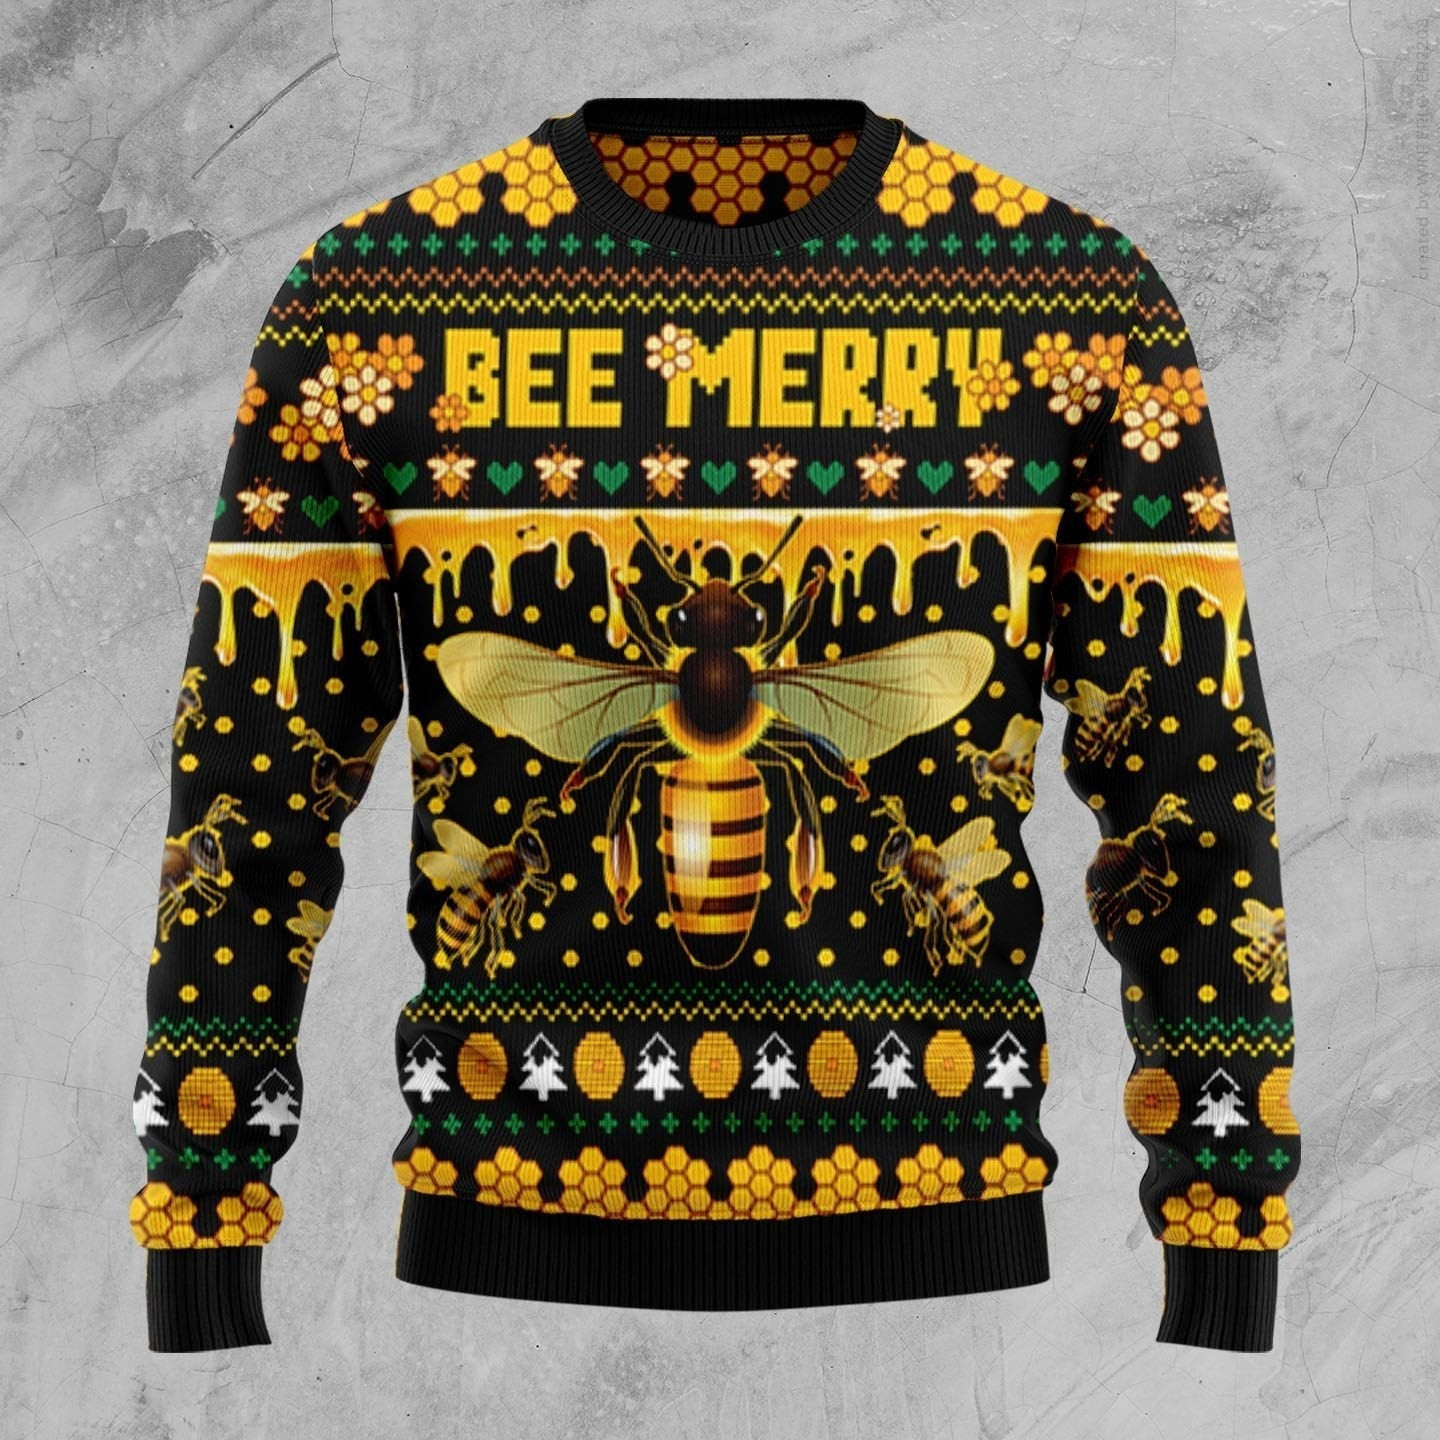 Bee Merry Ugly Christmas Sweater Ugly Sweater For Men Women, Holiday Sweater